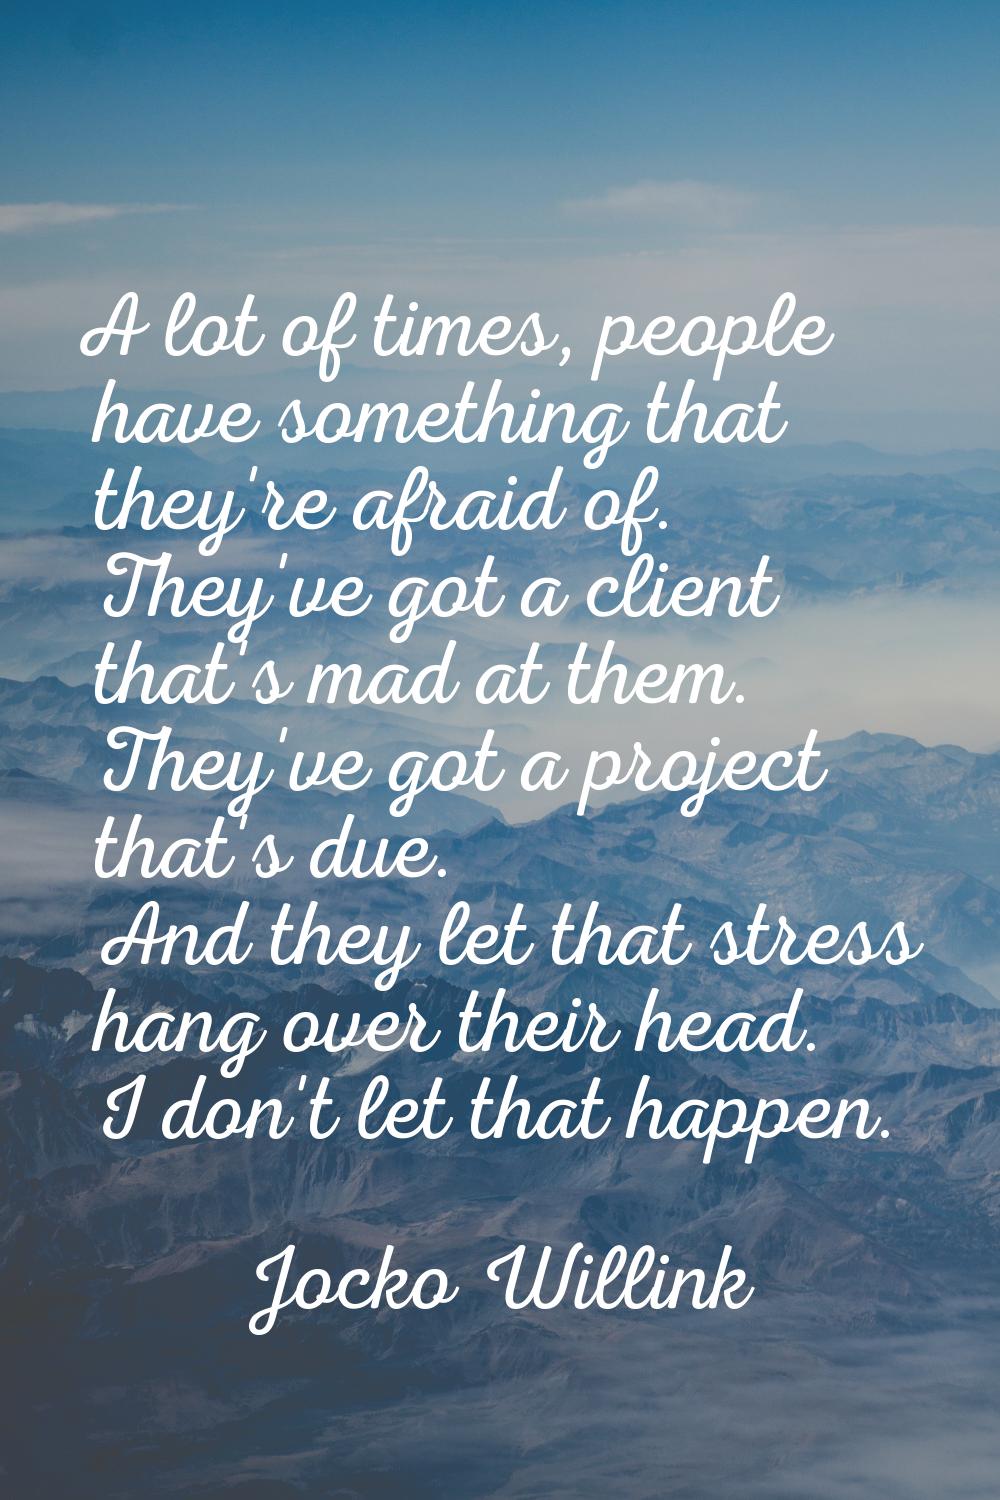 A lot of times, people have something that they're afraid of. They've got a client that's mad at th